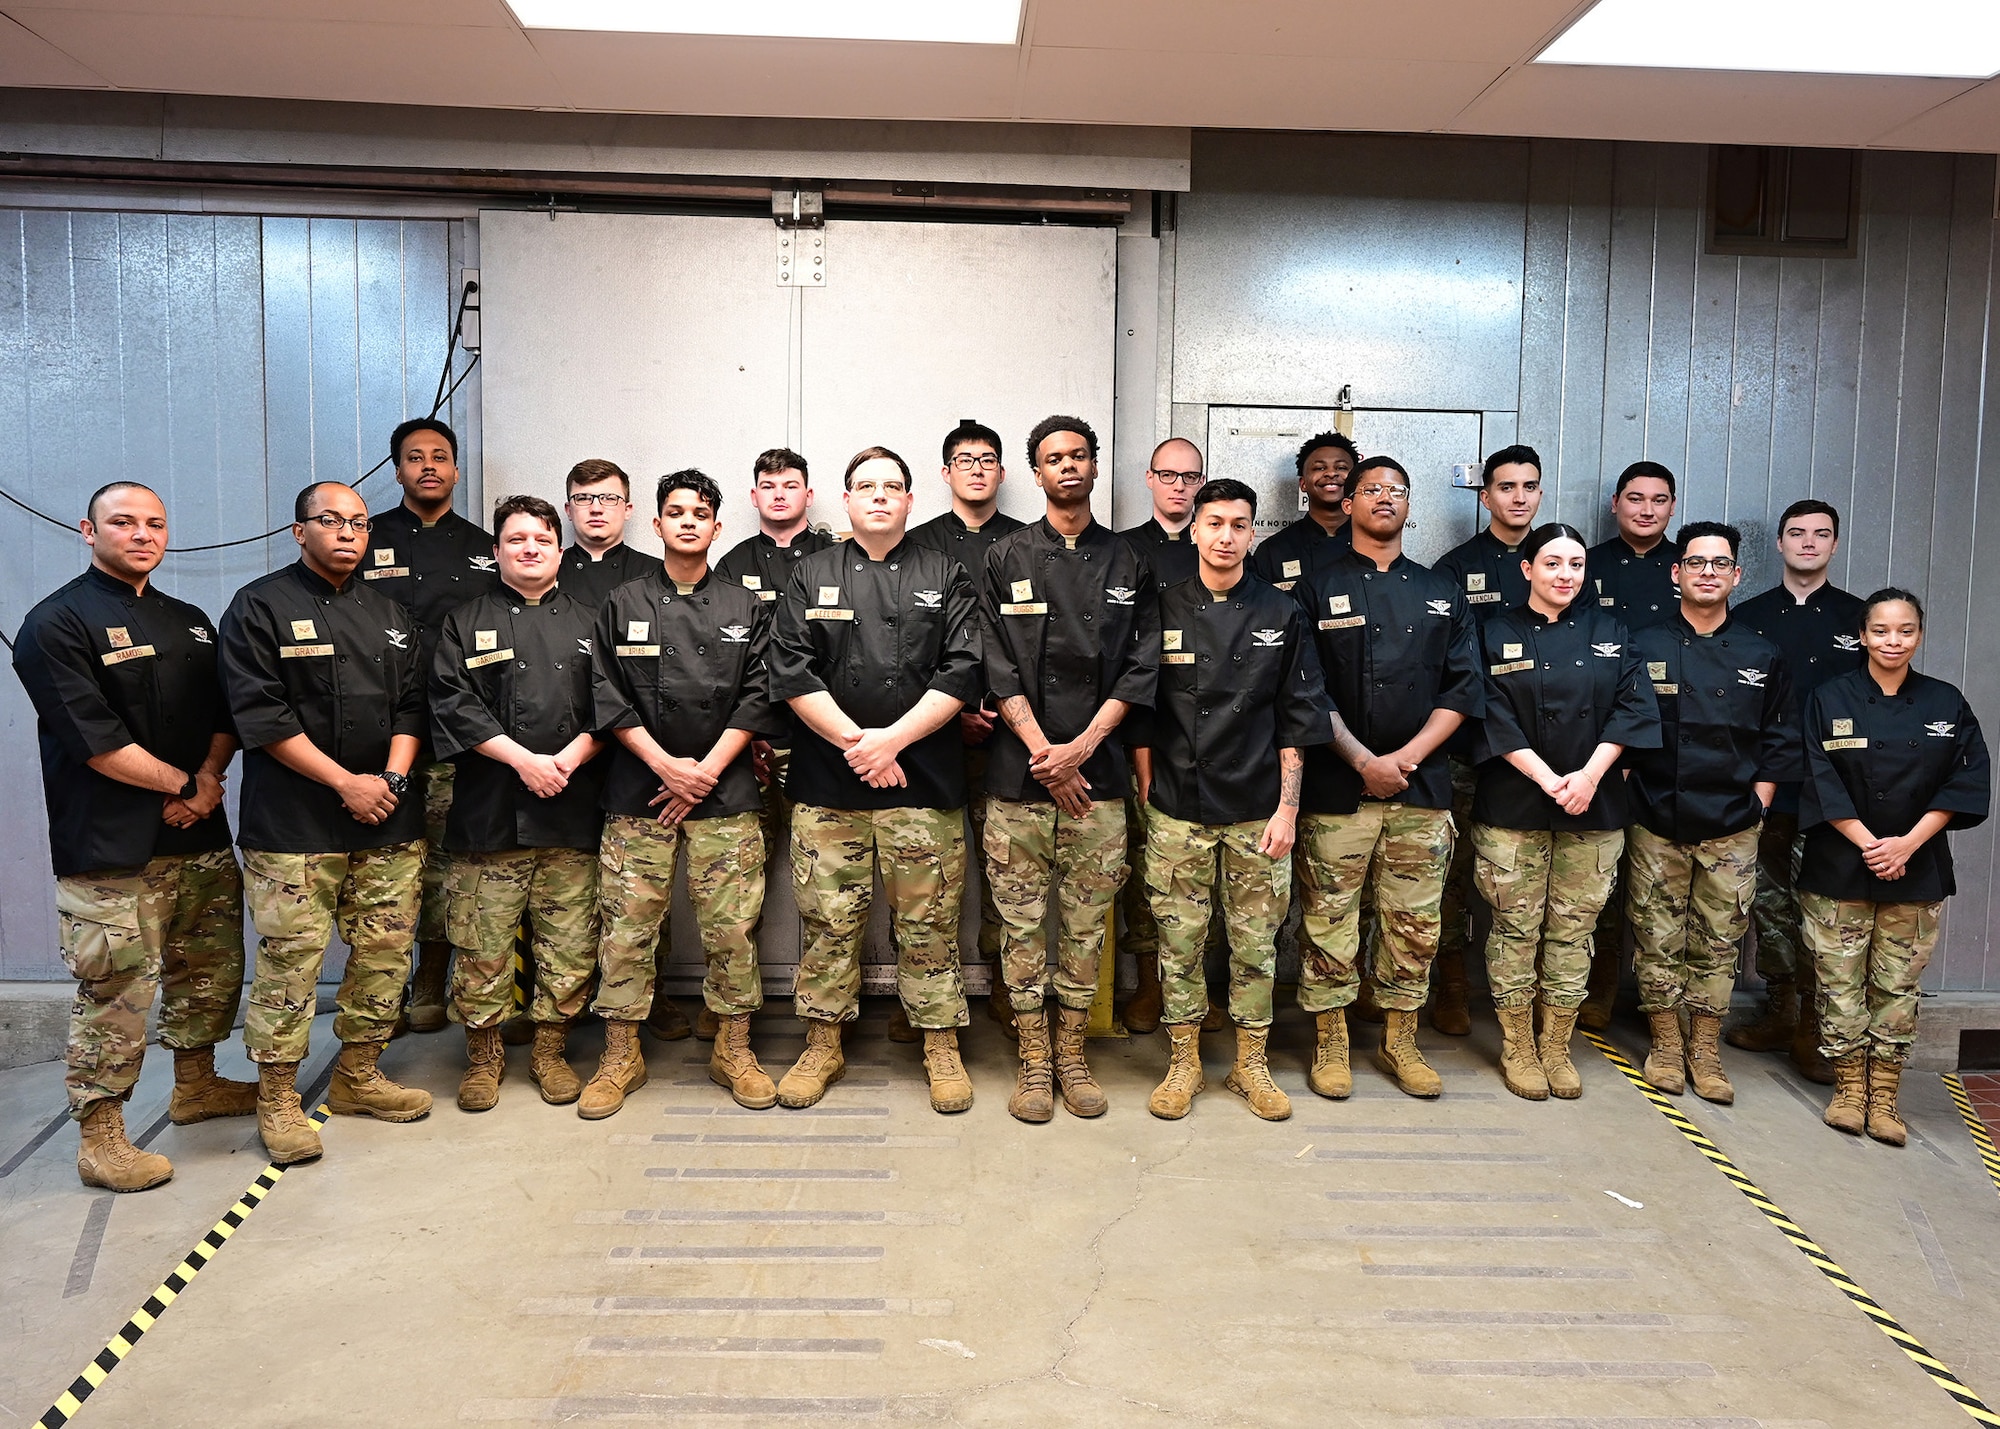 group photo of Missile Alert Facility Feeding Operations team, wearing food service tops and OCP pants.